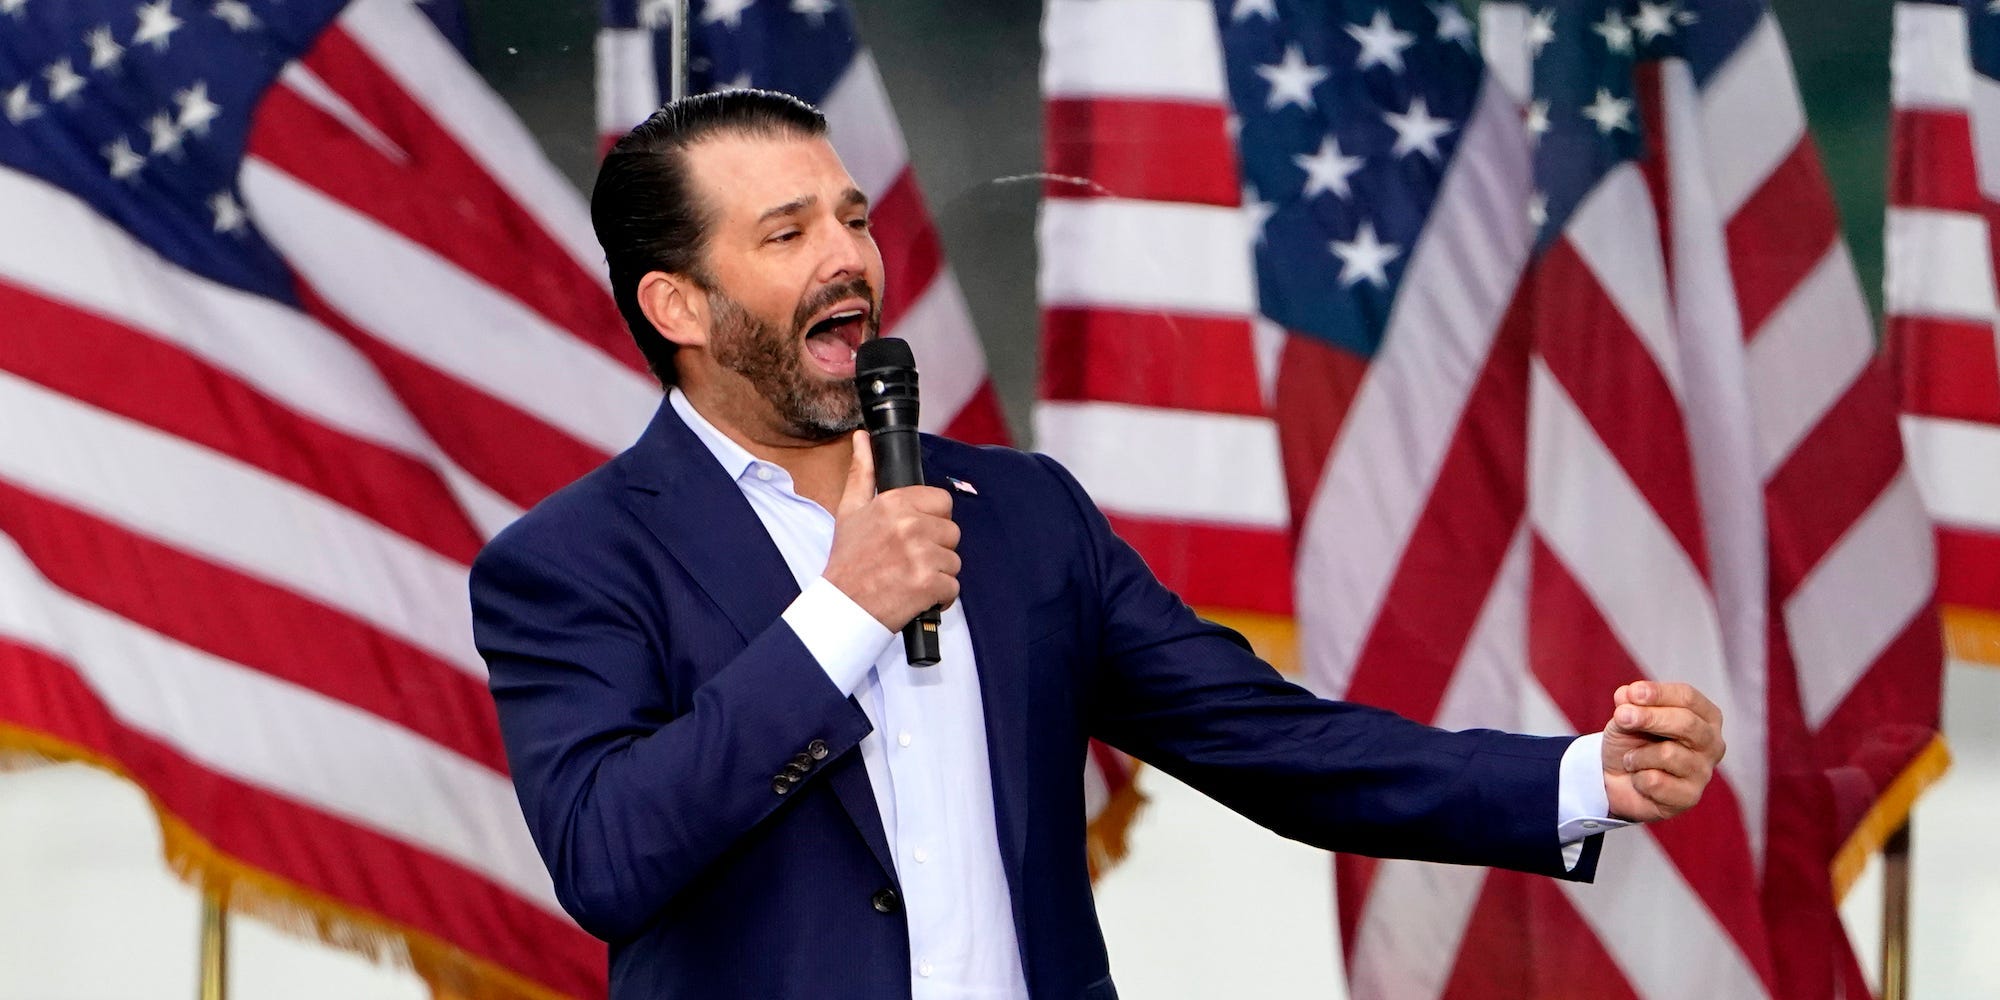 Donald Trump Jr. speaks at a rally on The Ellipse on Jan. 6, 2021.